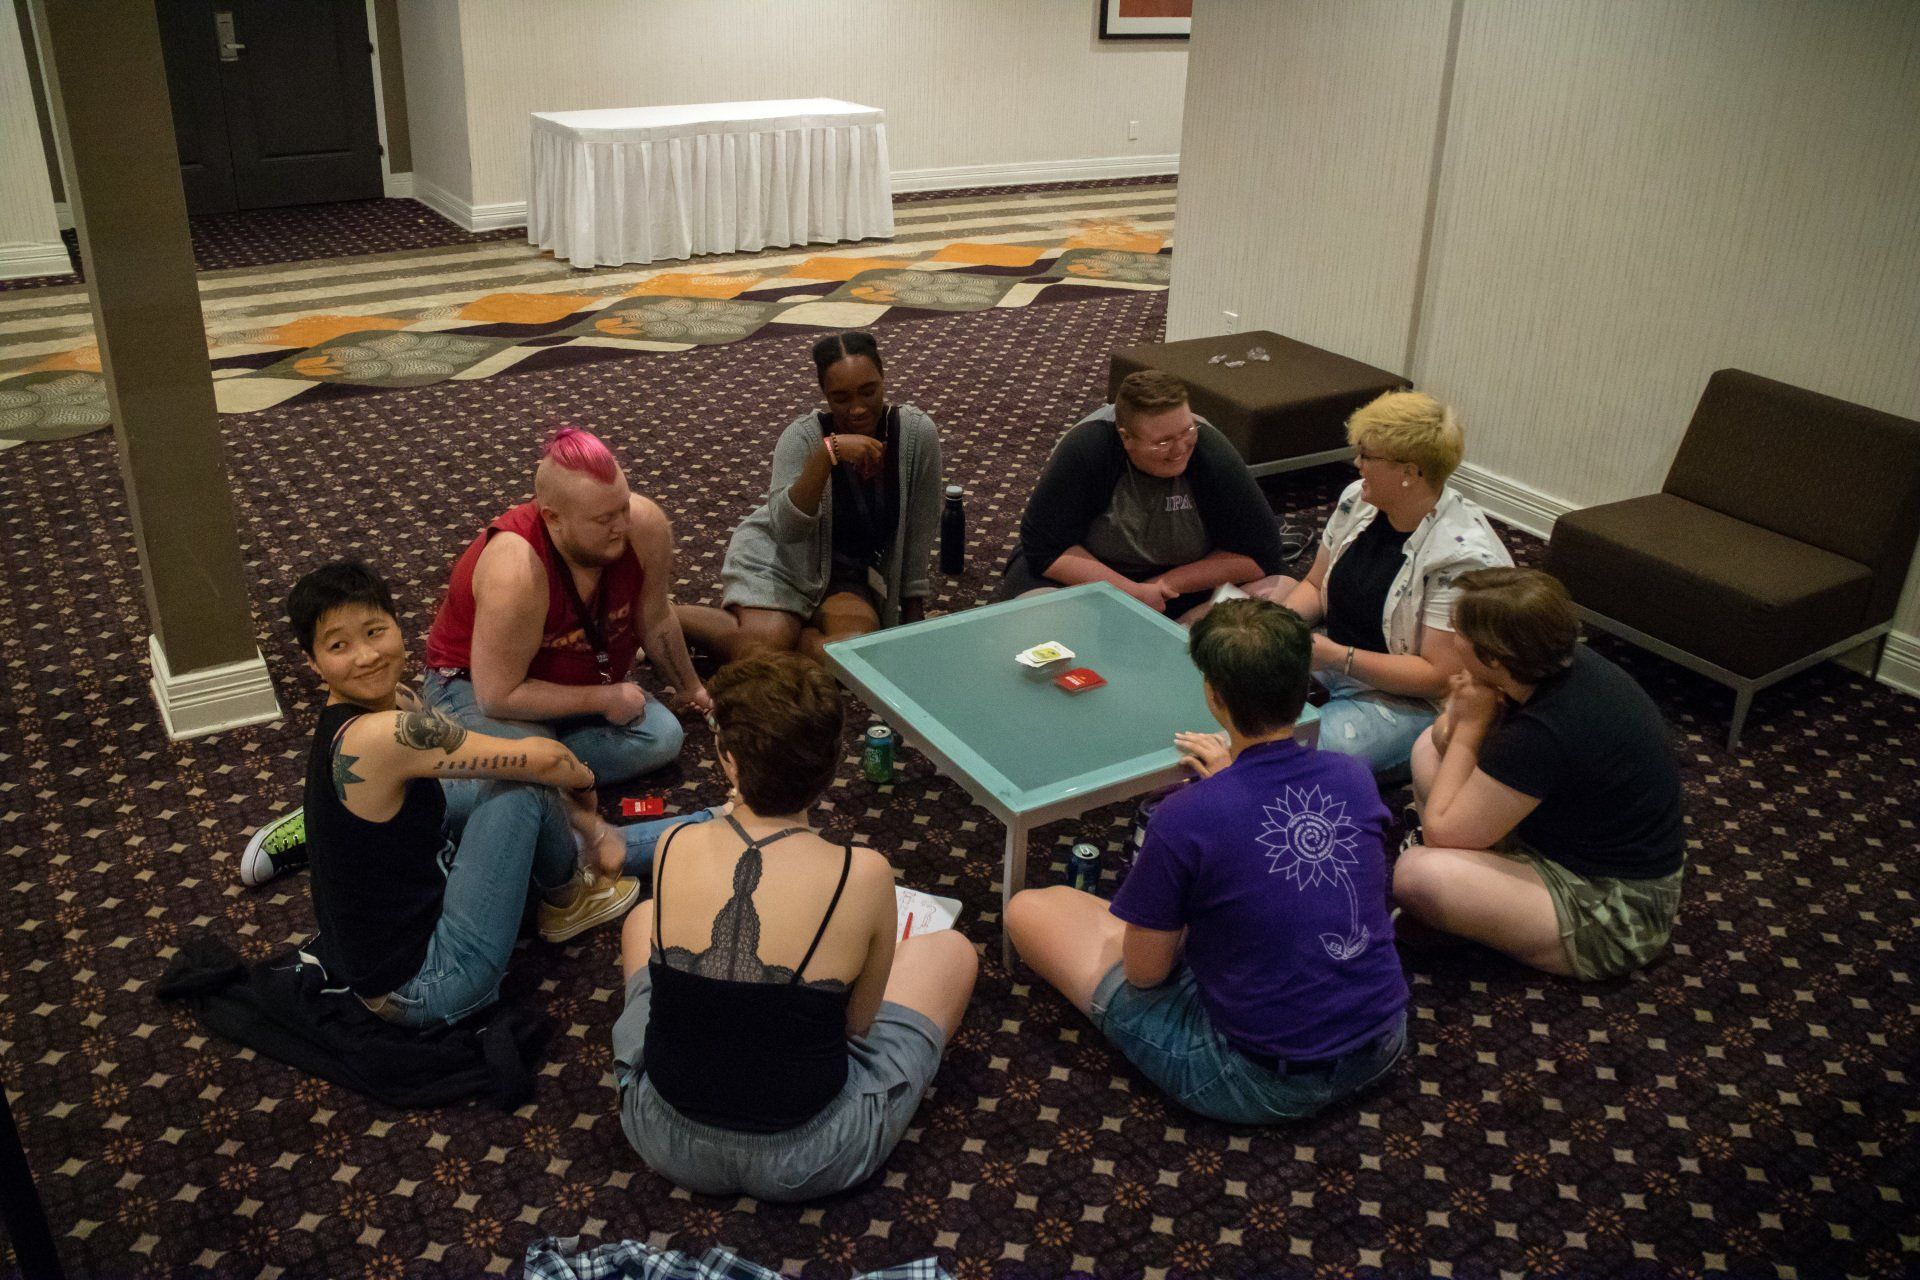 A large group of people siting on the floor around a coffee table, playing a game.